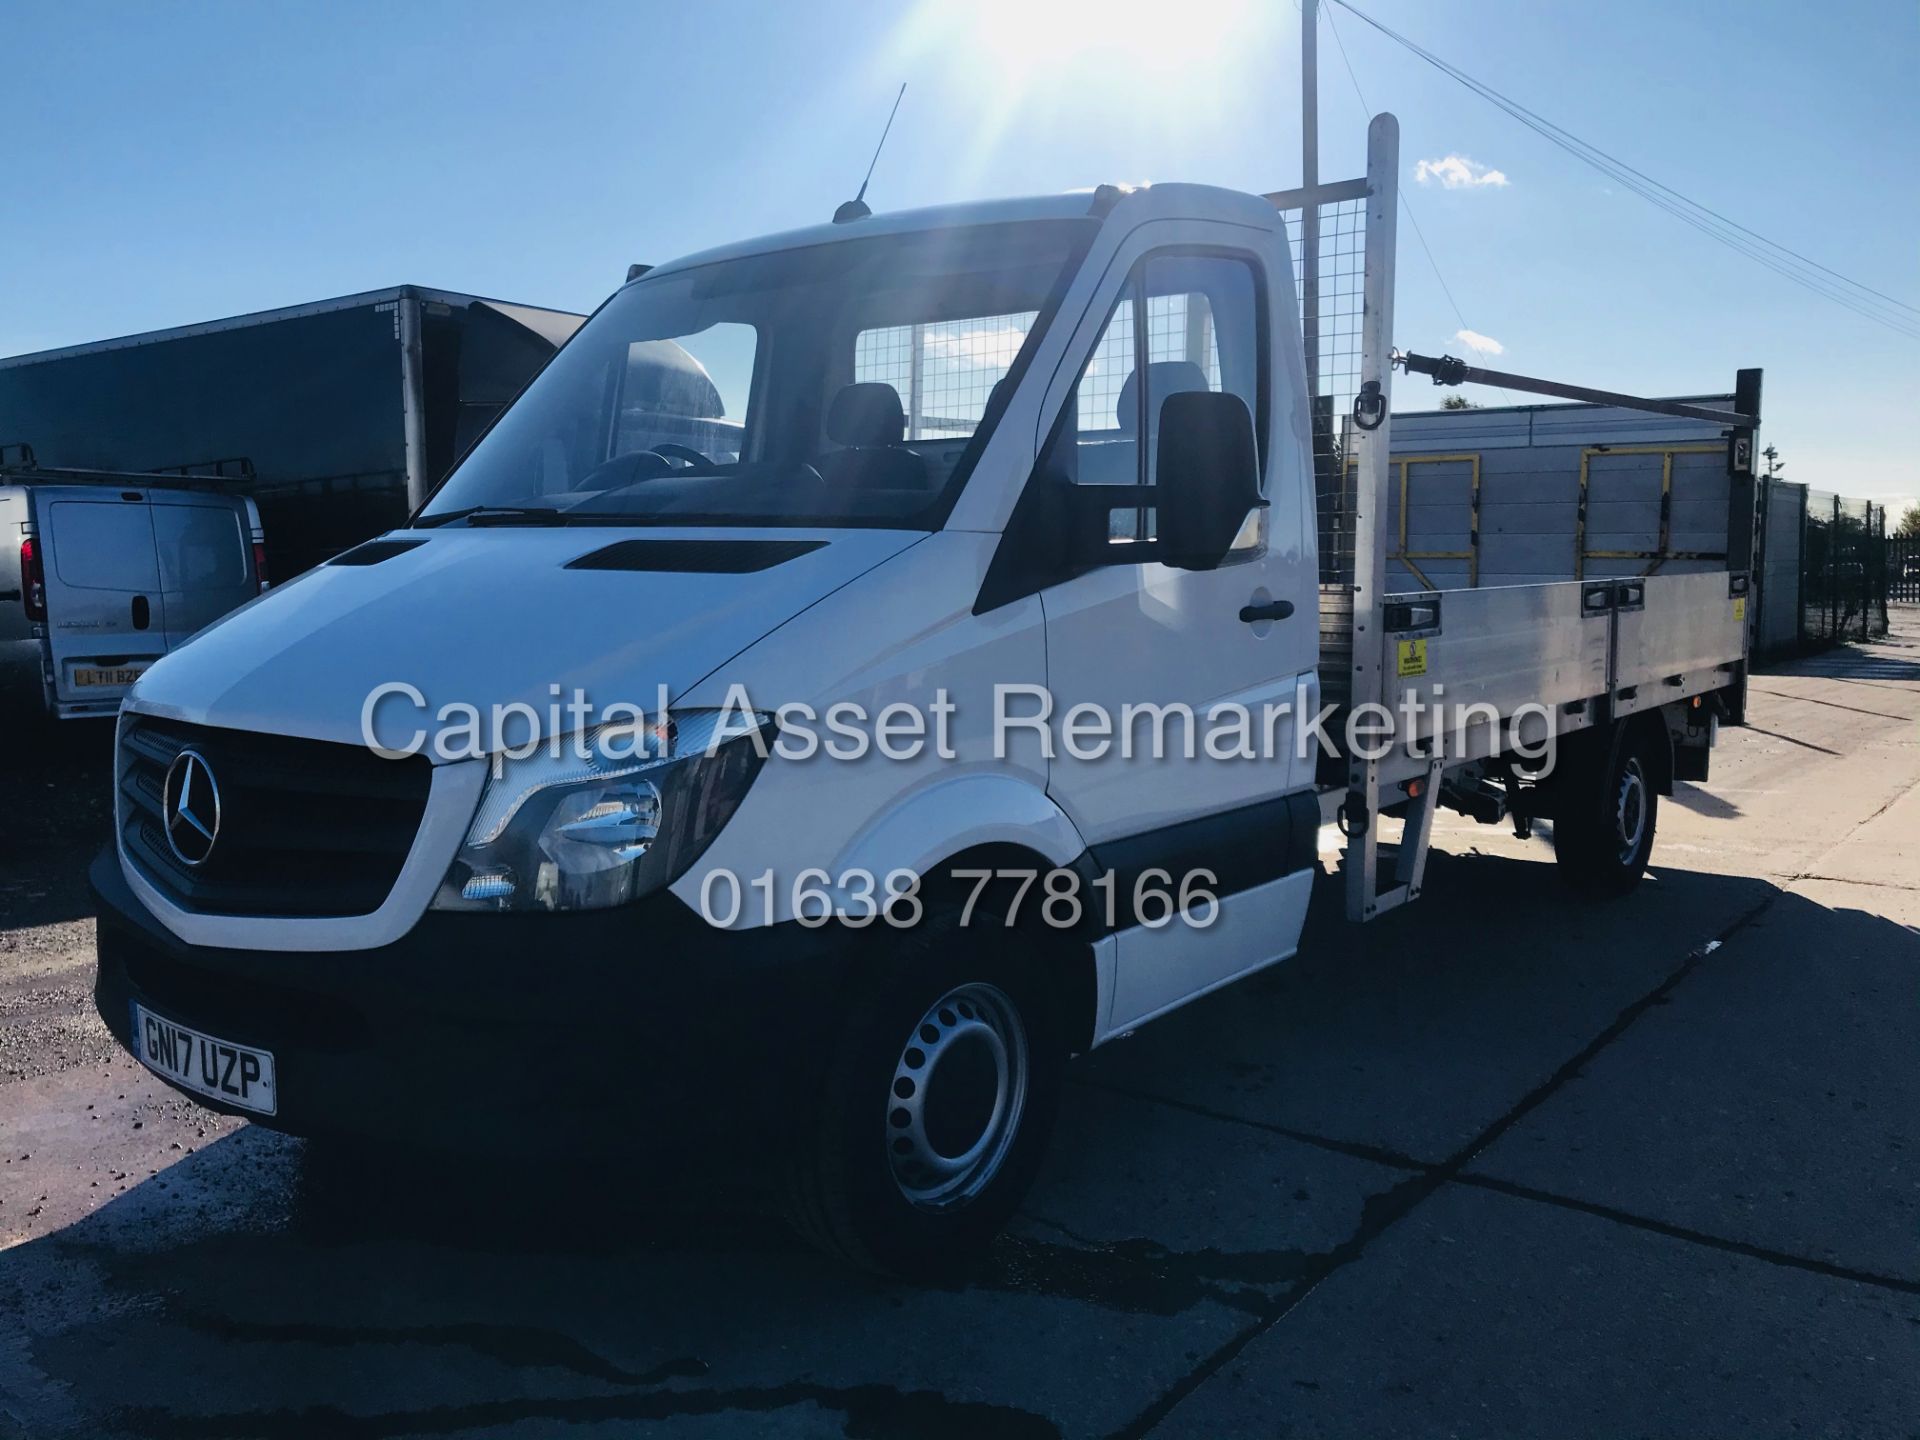 On Sale MERCEDES SPRINTER 316CDI LWB "14FT DROPSIDE" WITH TAIL-LIFT (17 REG) EURO 6 - ULEZ COMPLIANT - Image 5 of 22